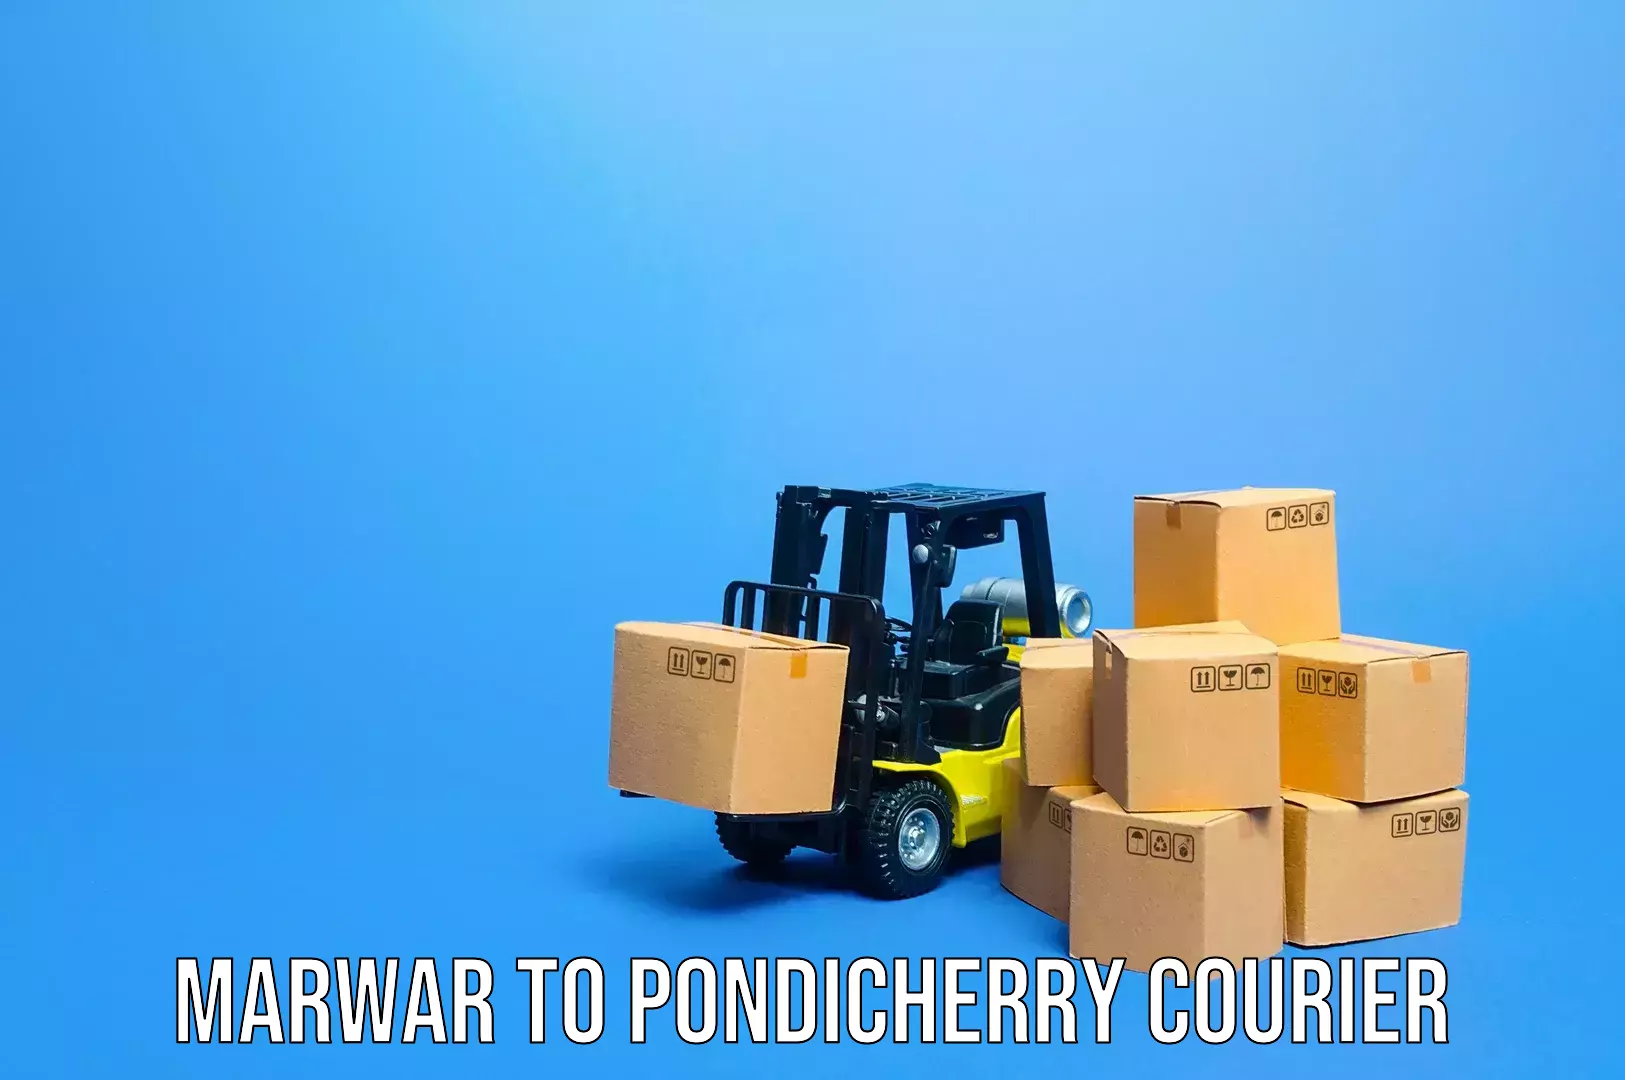 Luggage shipping specialists Marwar to Pondicherry